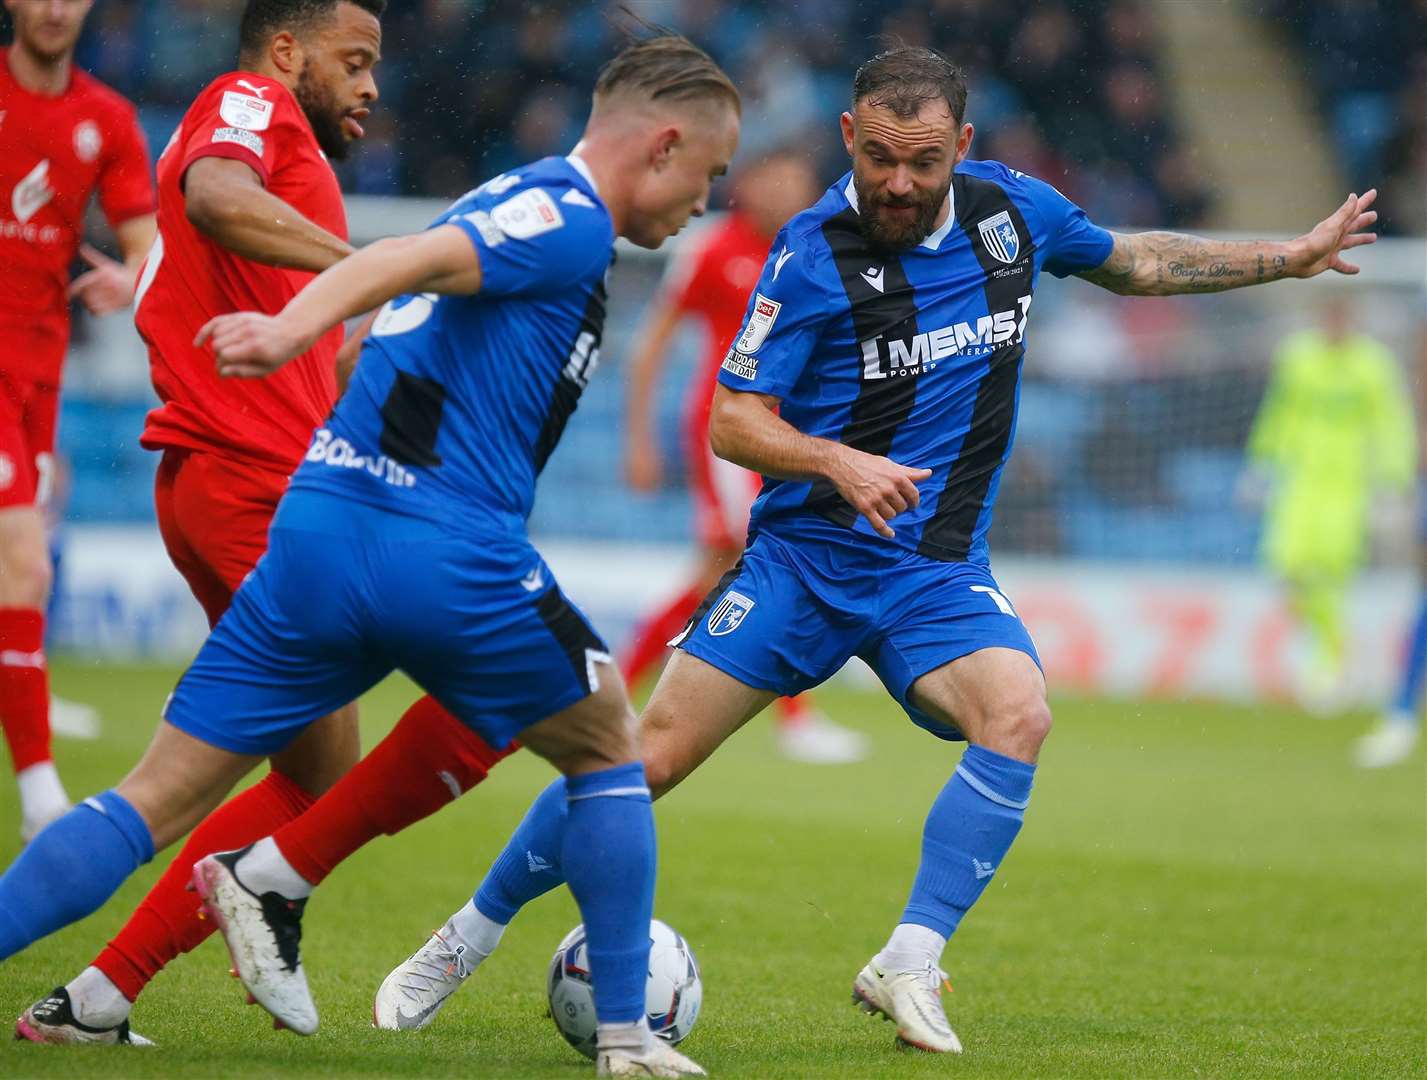 Danny Lloyd fights hard for Gills. Picture: Andy Jones